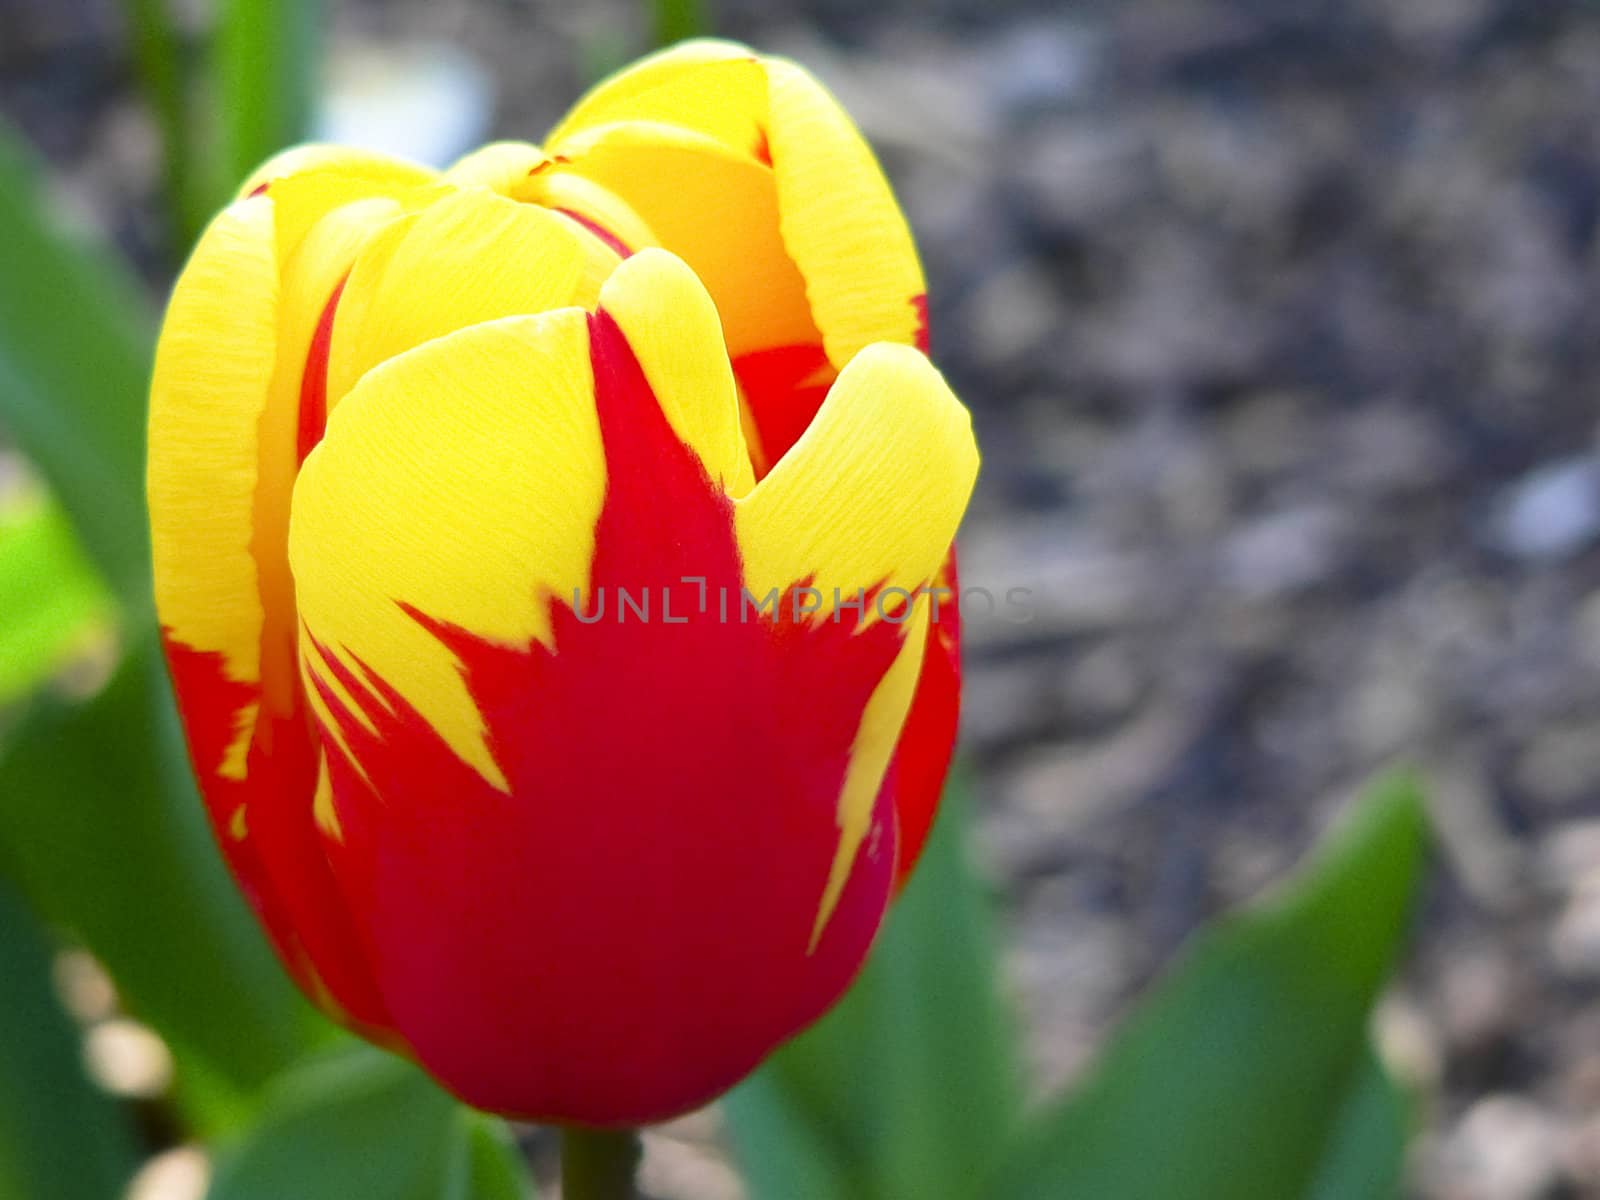 Close up beautiful single yellow and red tulip in park